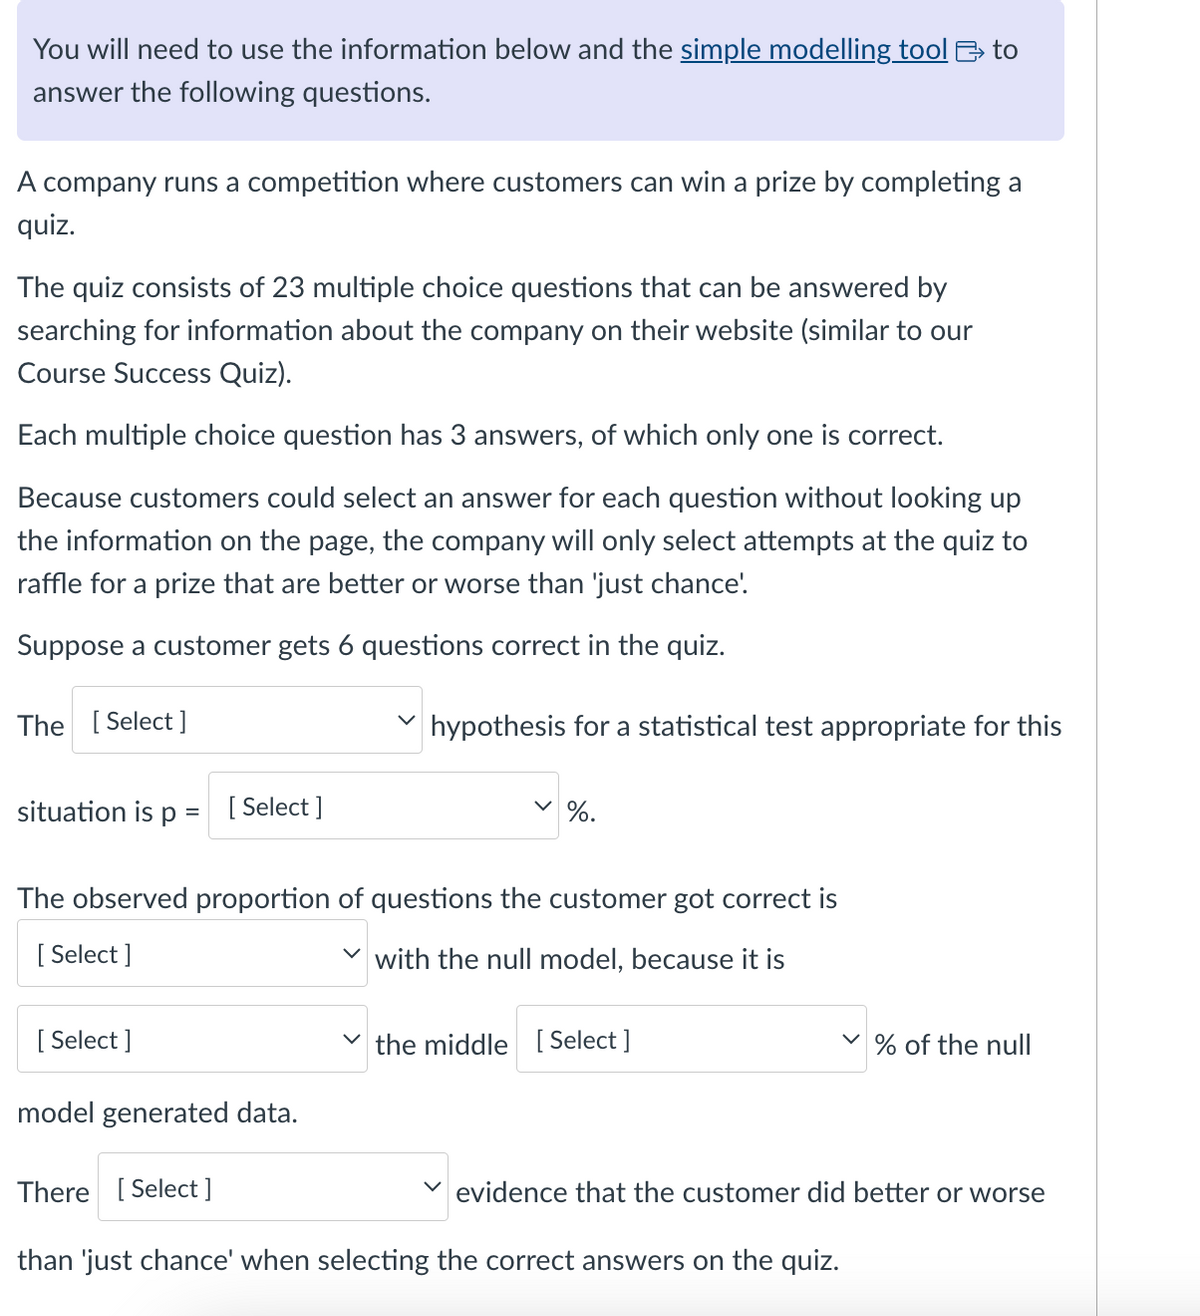 You will need to use the information below and the simple modelling tool to
answer the following questions.
A company runs a competition where customers can win a prize by completing a
quiz.
The quiz consists of 23 multiple choice questions that can be answered by
searching for information about the company on their website (similar to our
Course Success Quiz).
Each multiple choice question has 3 answers, of which only one is correct.
Because customers could select an answer for each question without looking up
the information on the page, the company will only select attempts at the quiz to
raffle for a prize that are better or worse than 'just chance'.
Suppose a customer gets 6 questions correct in the quiz.
The [Select]
✓ hypothesis for a statistical test appropriate for this
%.
situation is p = [Select]
The observed proportion of questions the customer got correct is
[Select]
with the null model, because it is
[Select]
✓ the middle [Select]
model generated data.
There [Select]
✓
% of the null
evidence that the customer did better or worse
than 'just chance' when selecting the correct answers on the quiz.